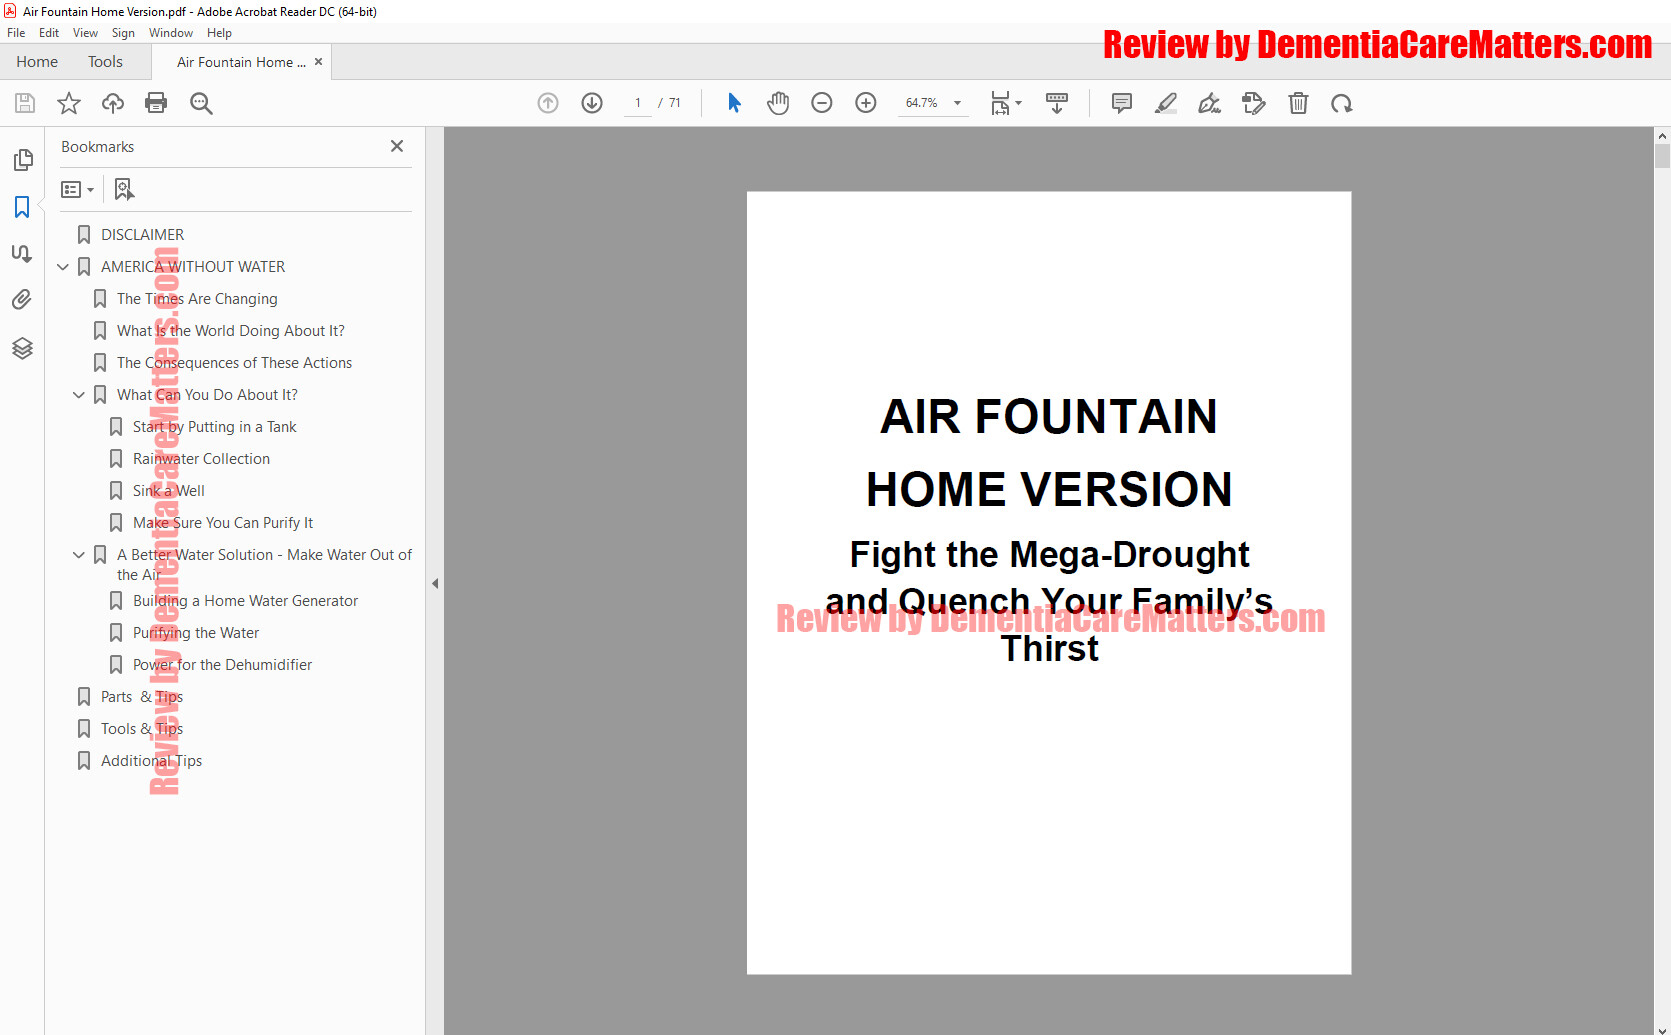 Air Fountain Home Version Table of Contents